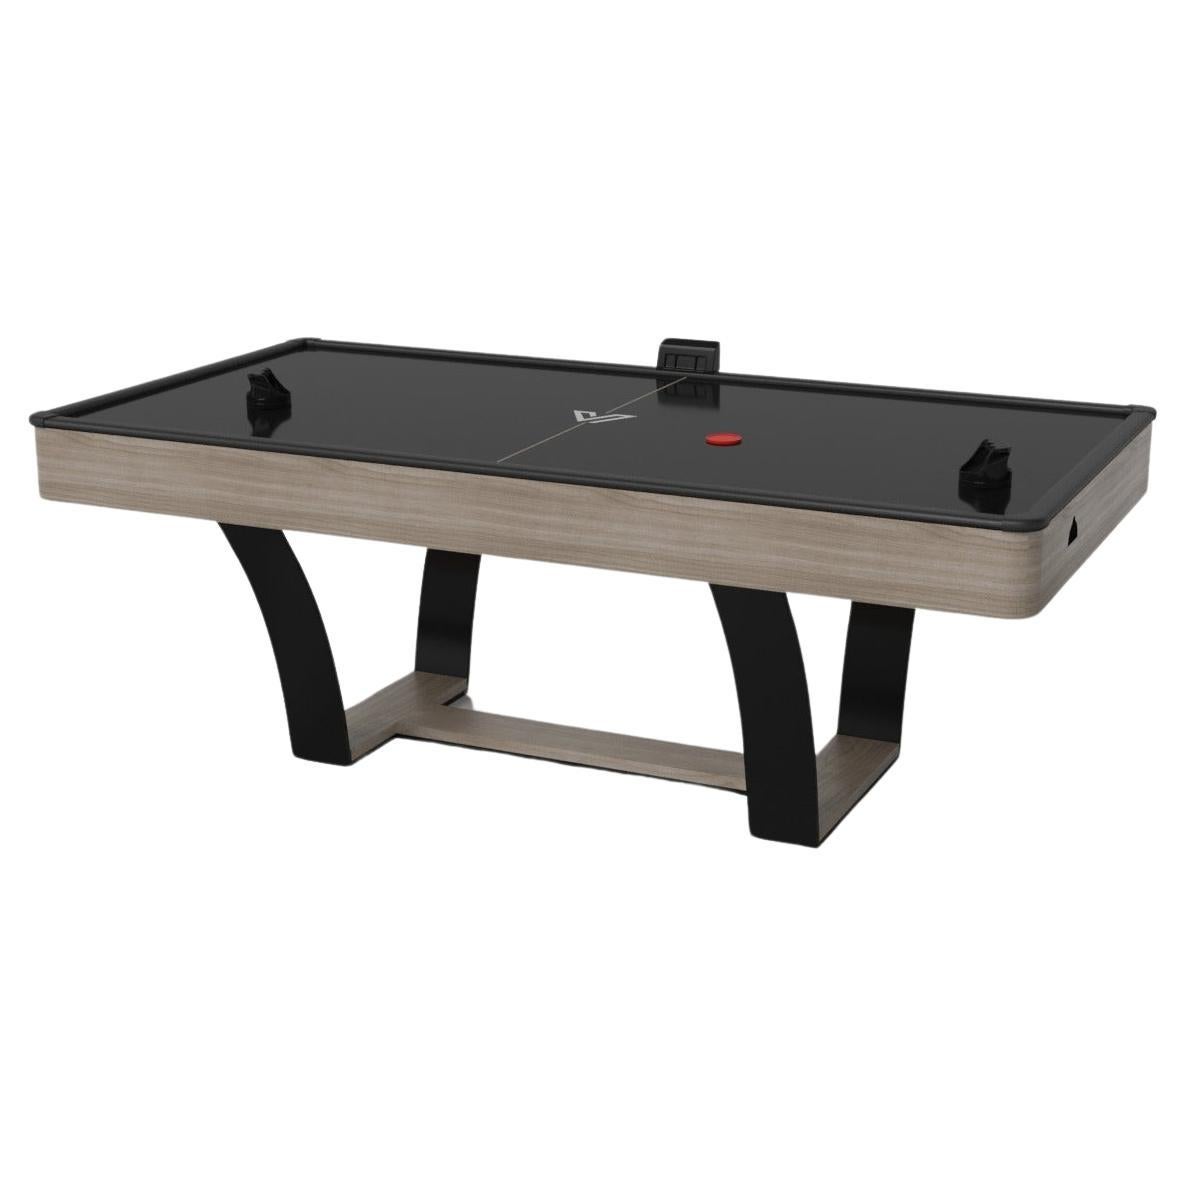 Elevate Customs Elite Air Hockey Tables /Solid White Oak Wood in 7' -Made in USA For Sale